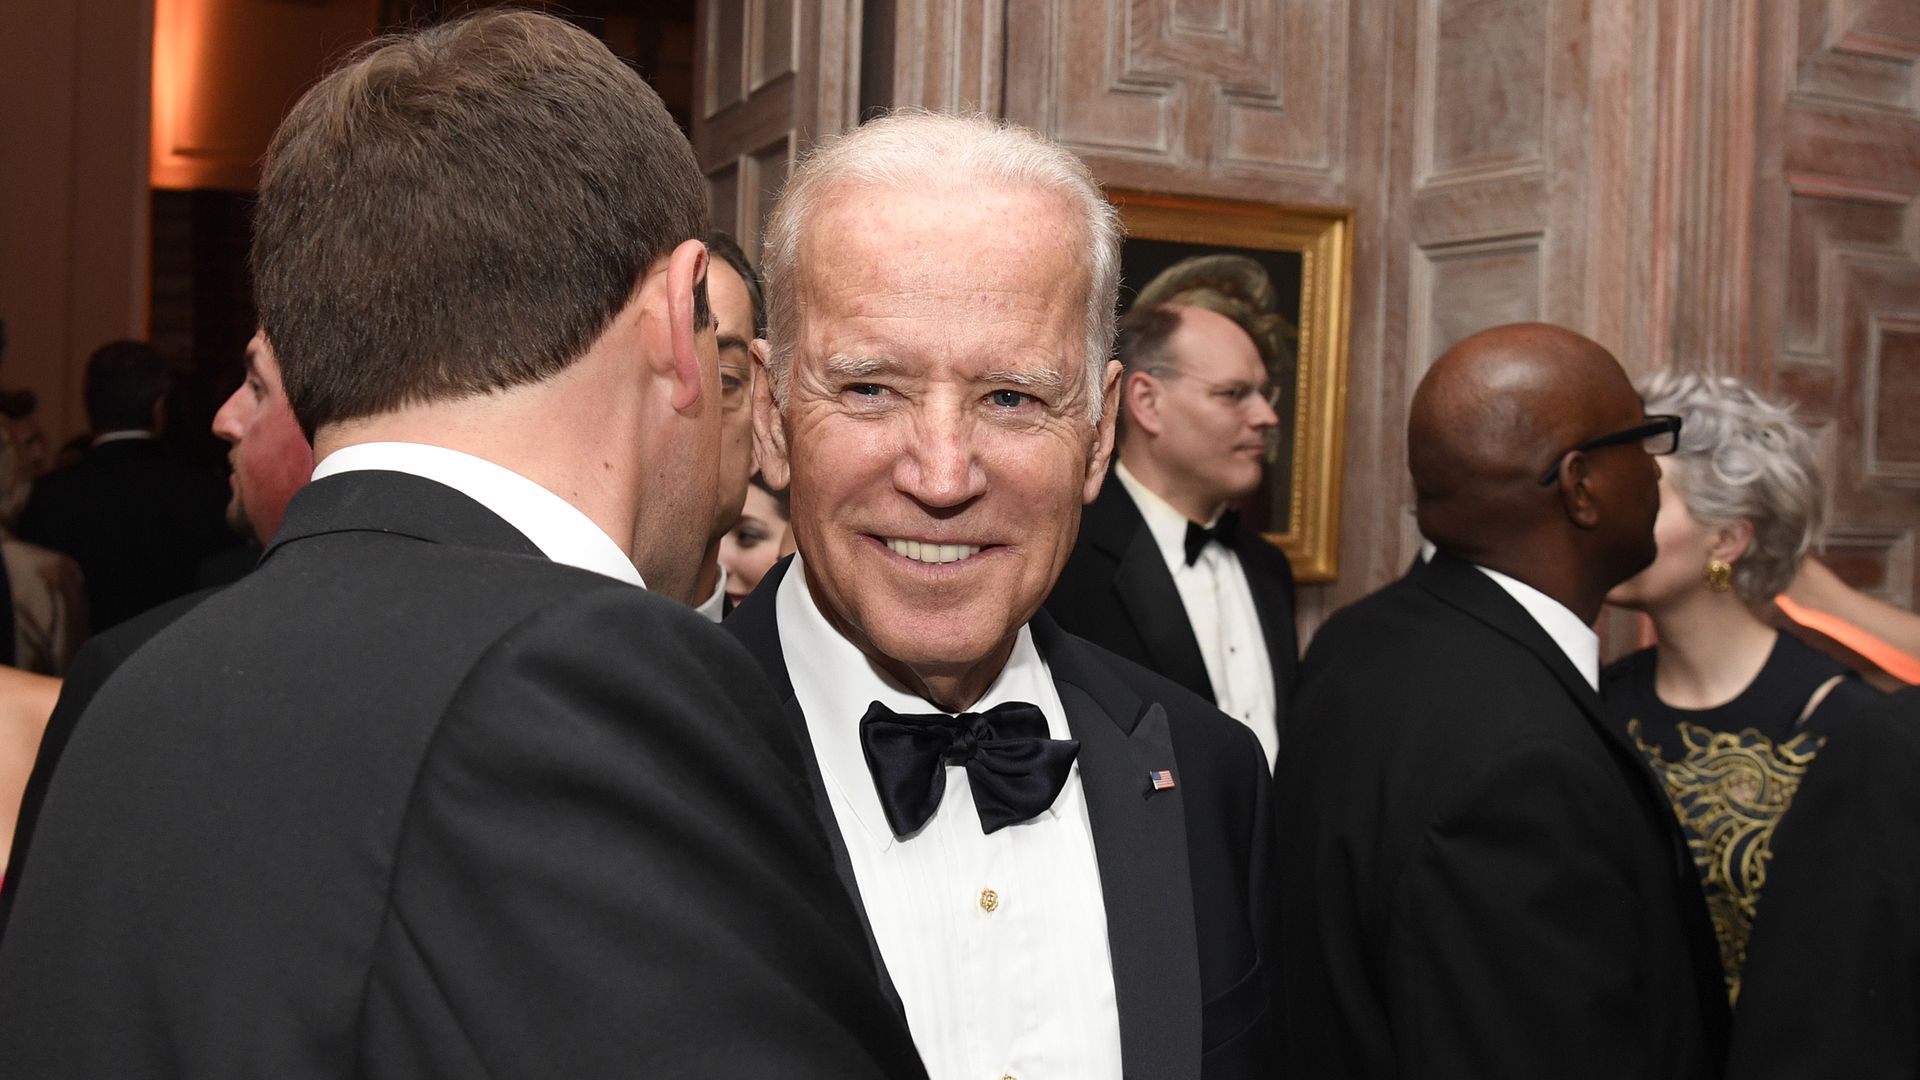 Joe Biden in a black tie and tuxedo at a party smiling with other guests around him